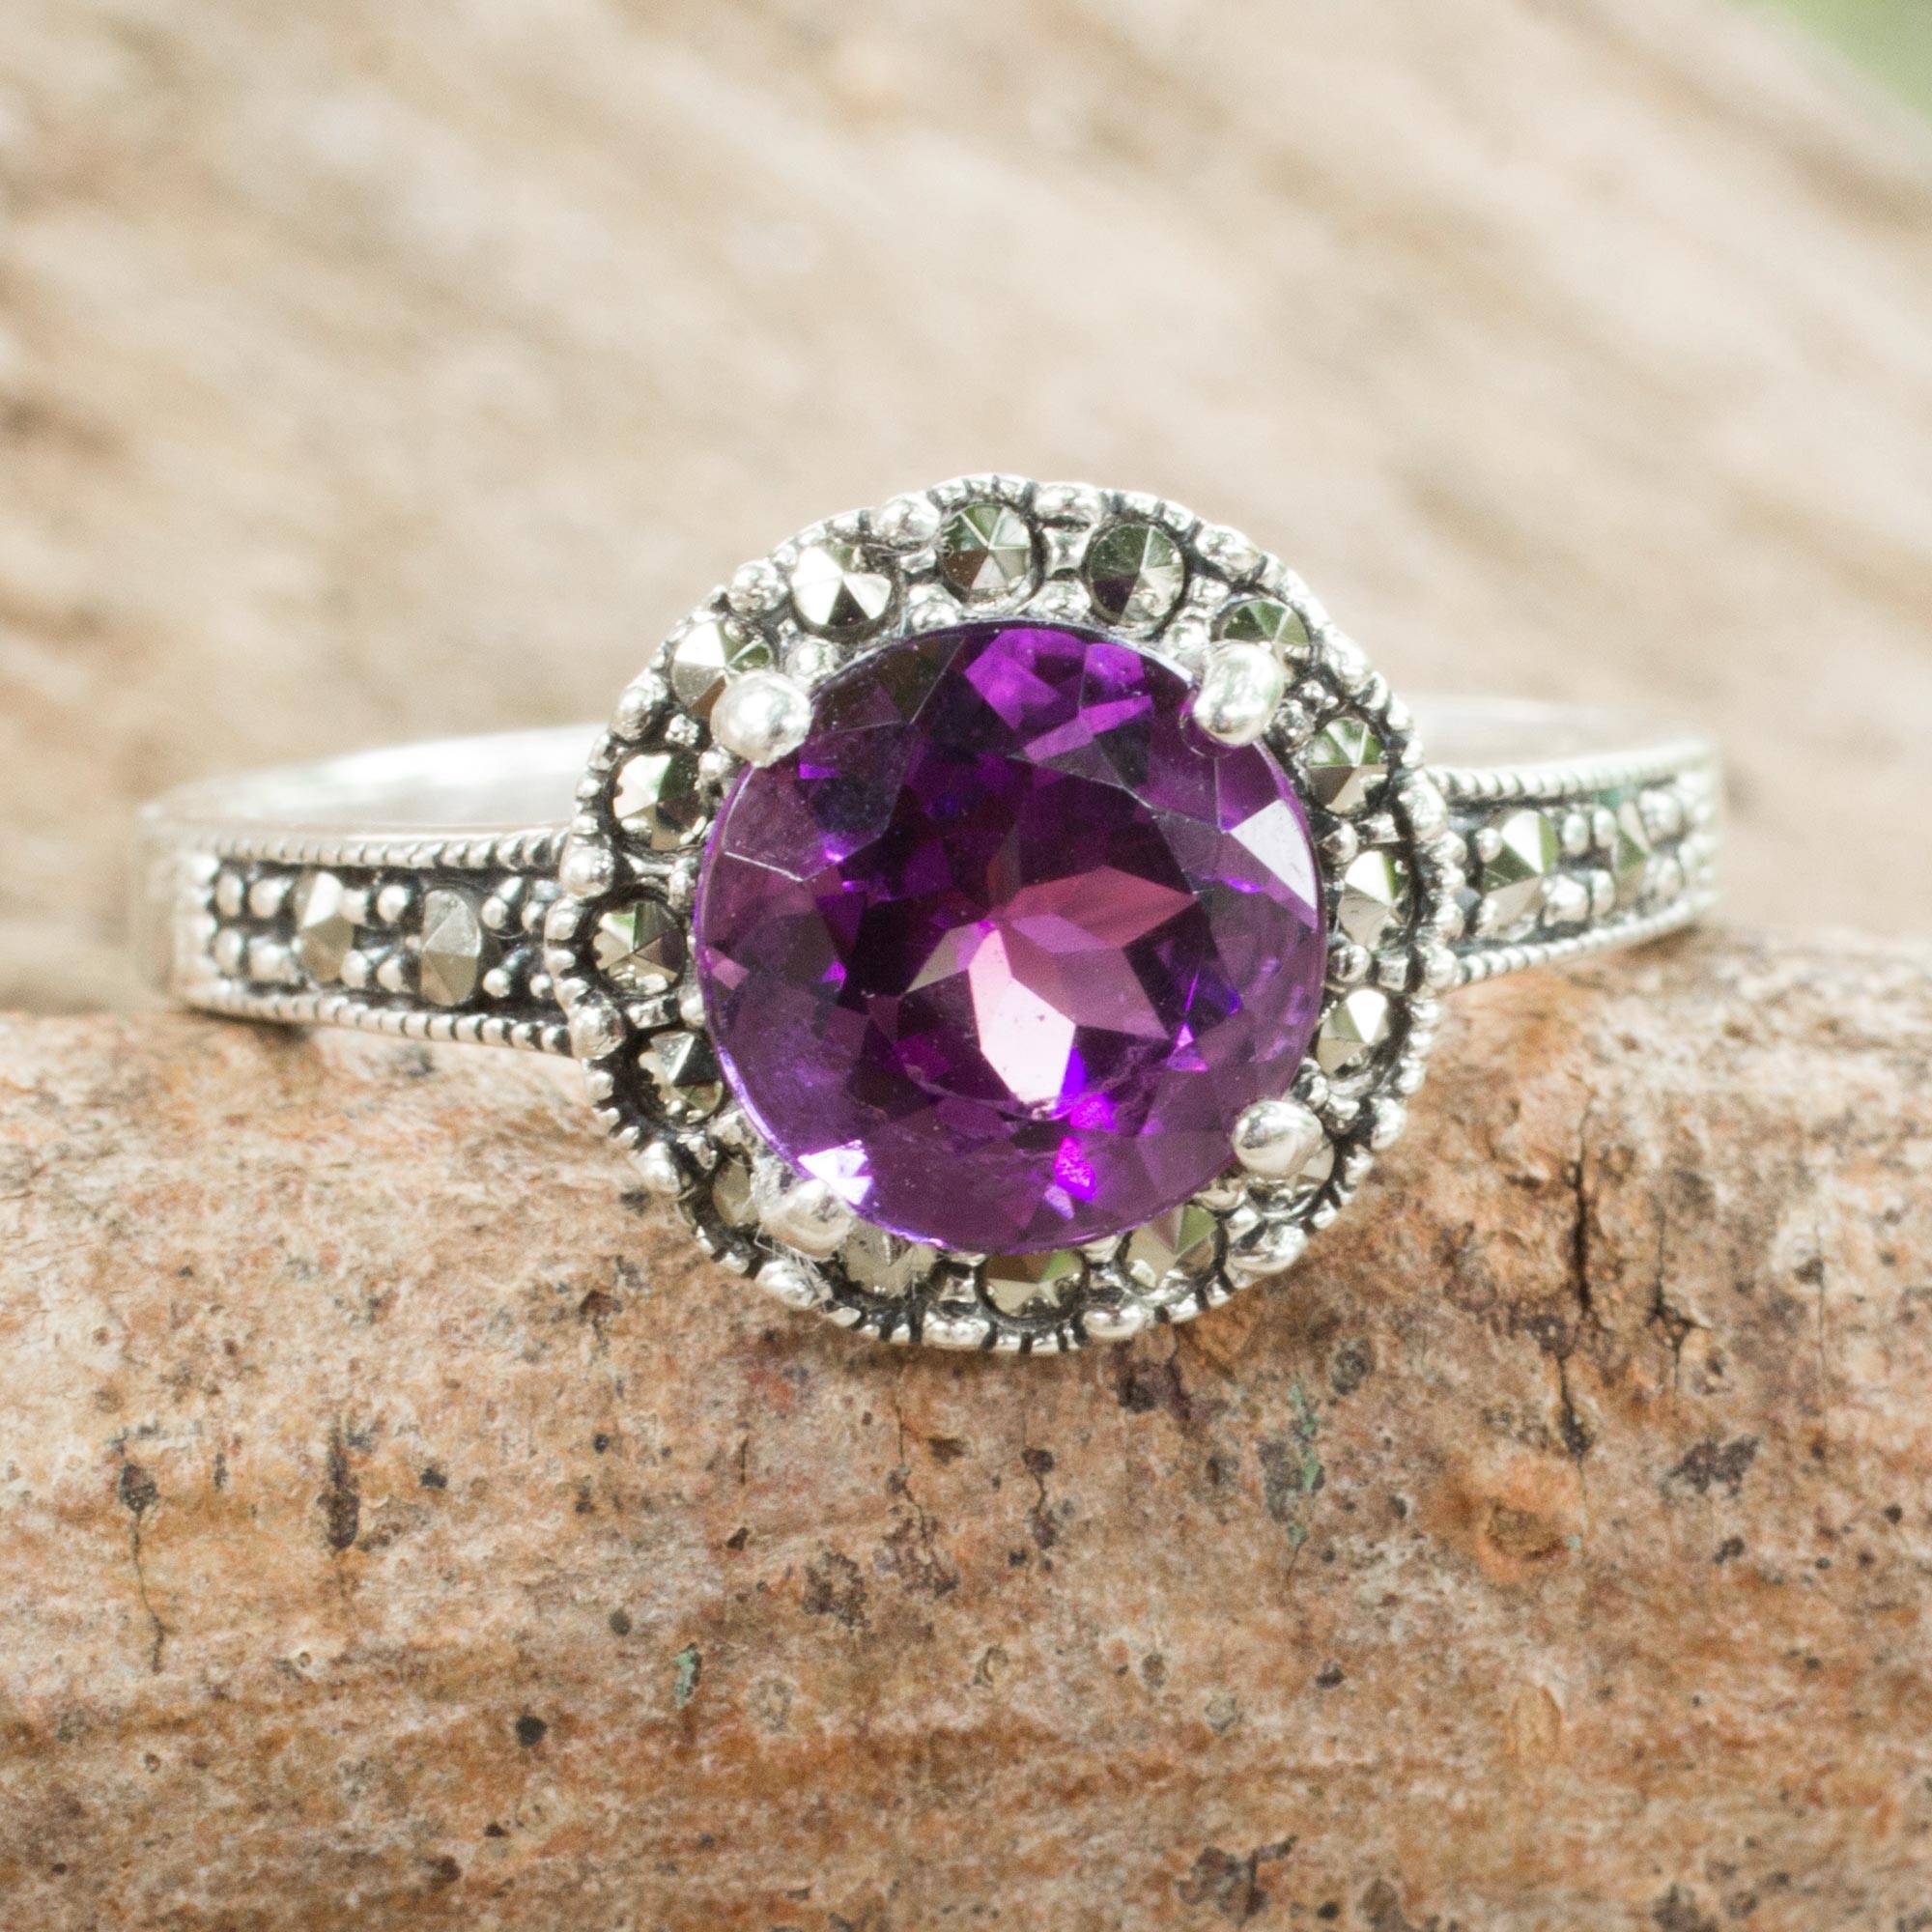 Amethyst and Marcasite Sterling Silver Ring Artisan Jewelry, 'Contemporary Belle'